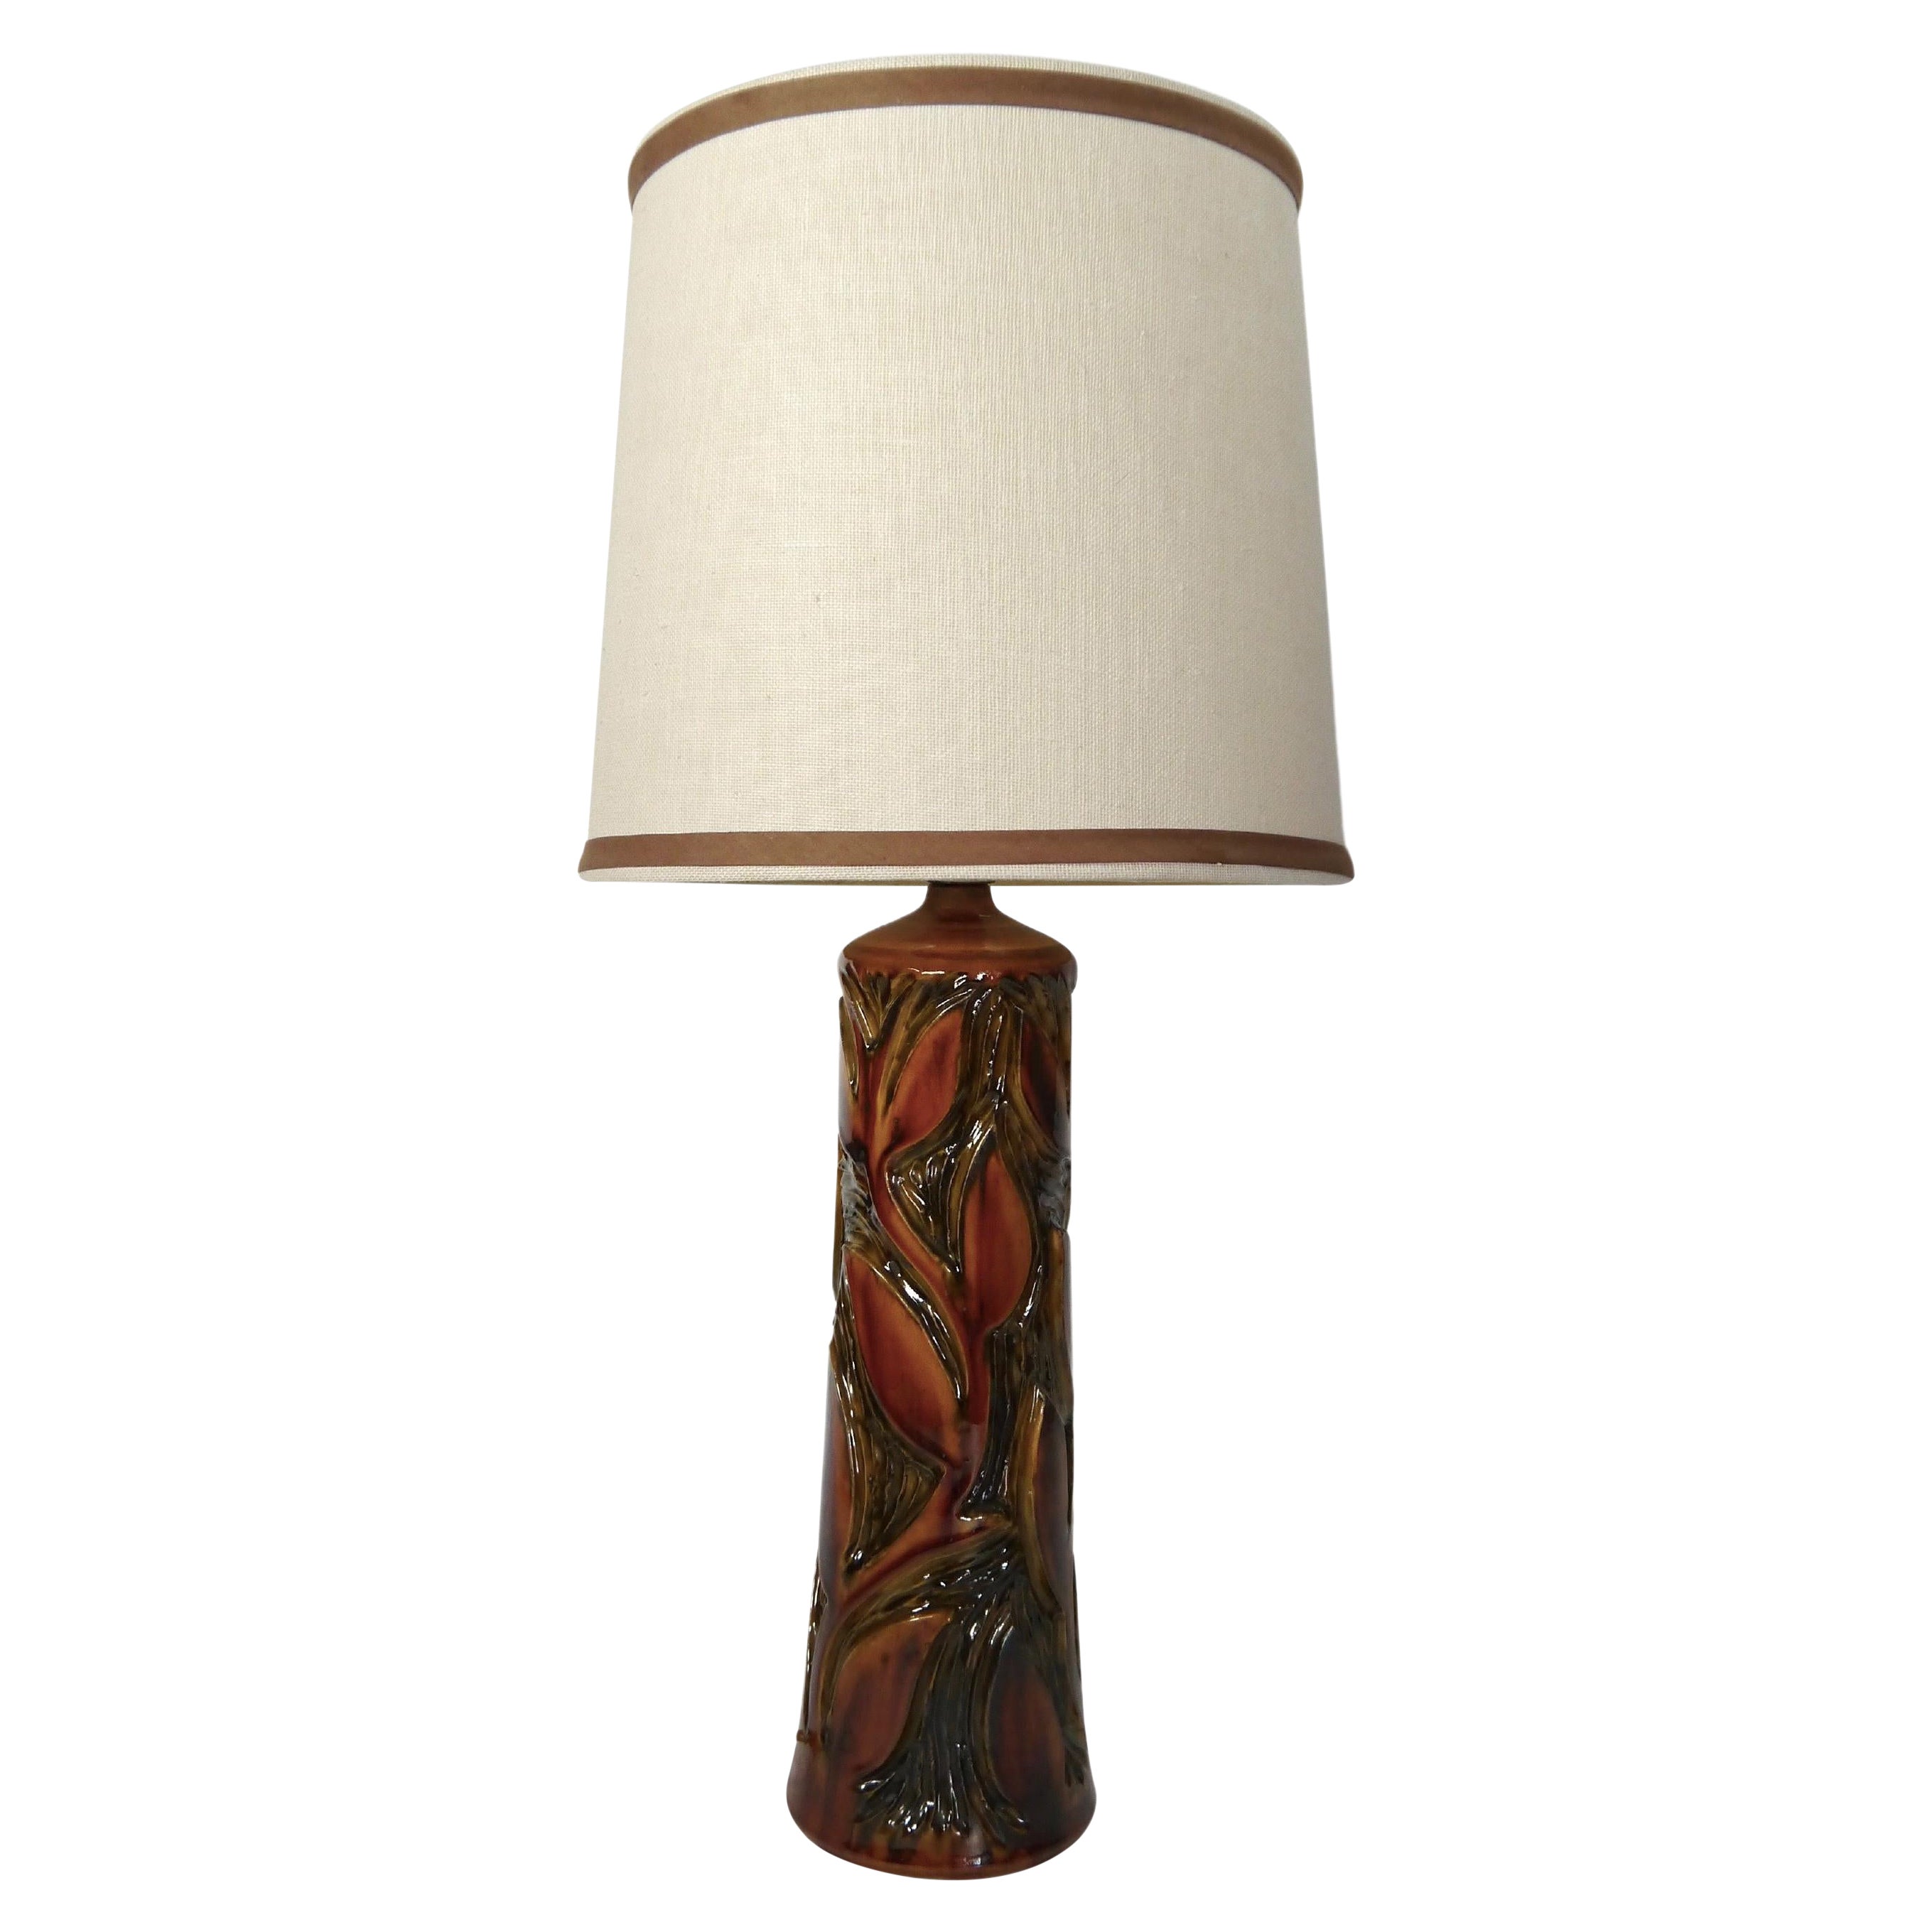 Tall Ceramic Table Lamp, by Rolf Tiemroth, Norway, 1970s For Sale